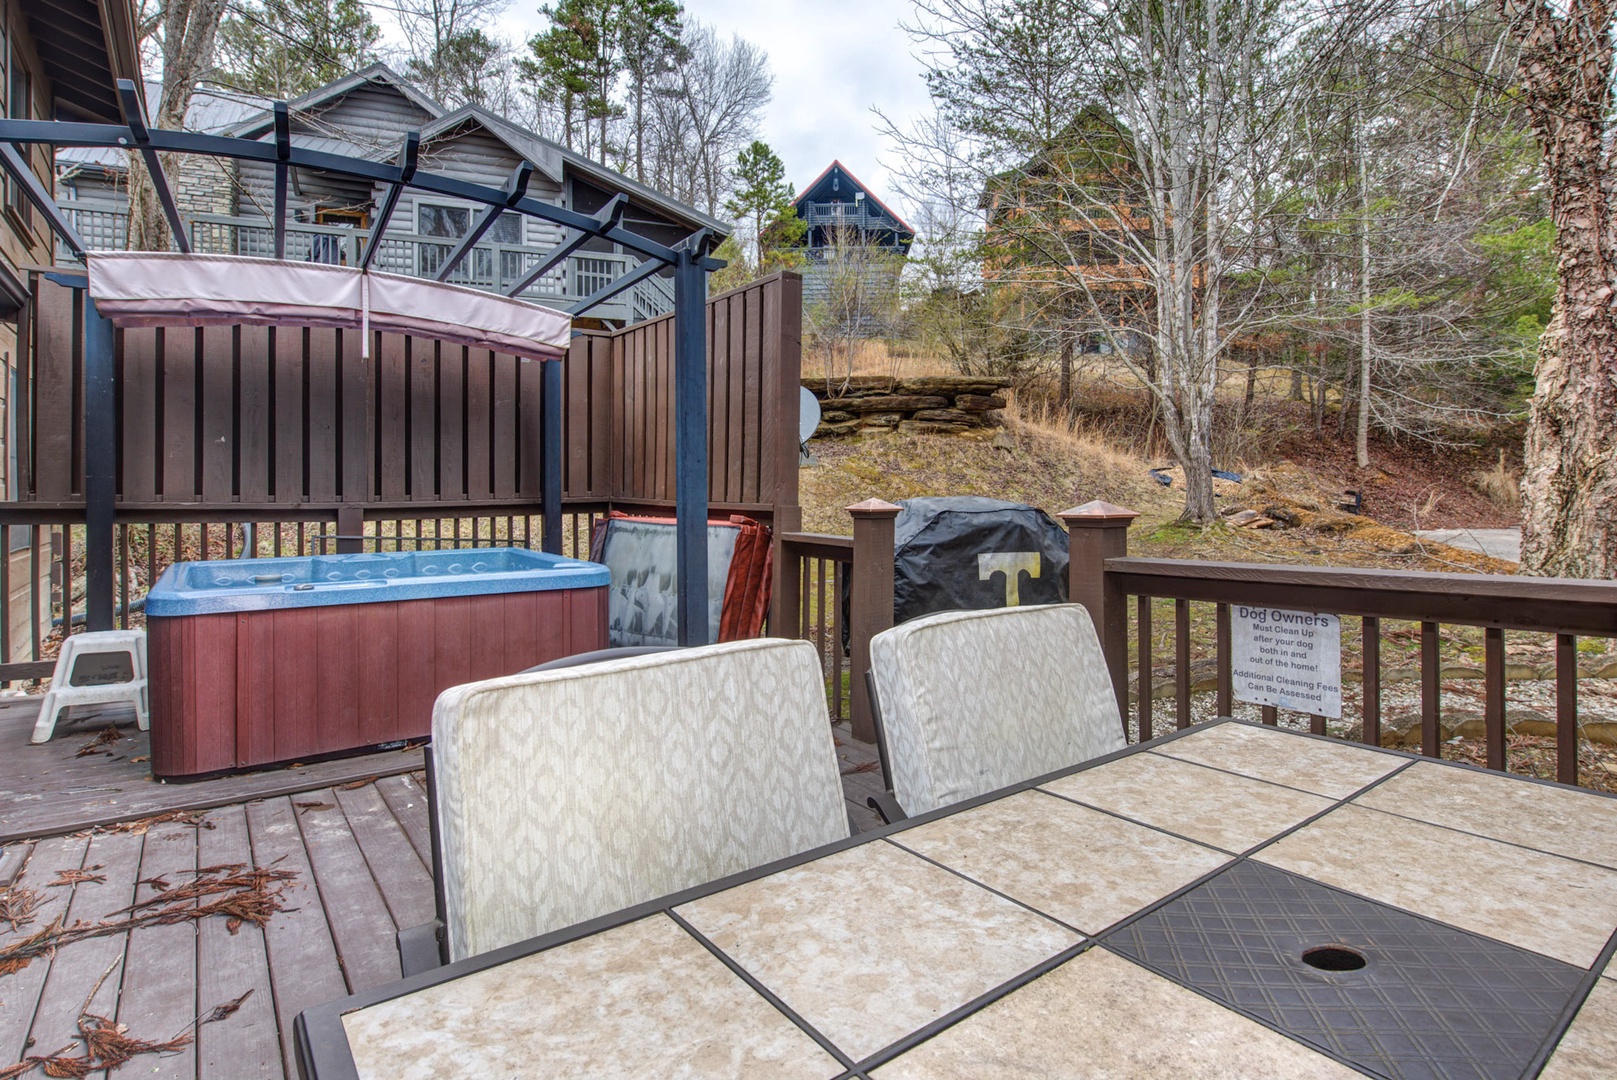 Enjoy alfresco dining and leisurely lounging on the spacious deck